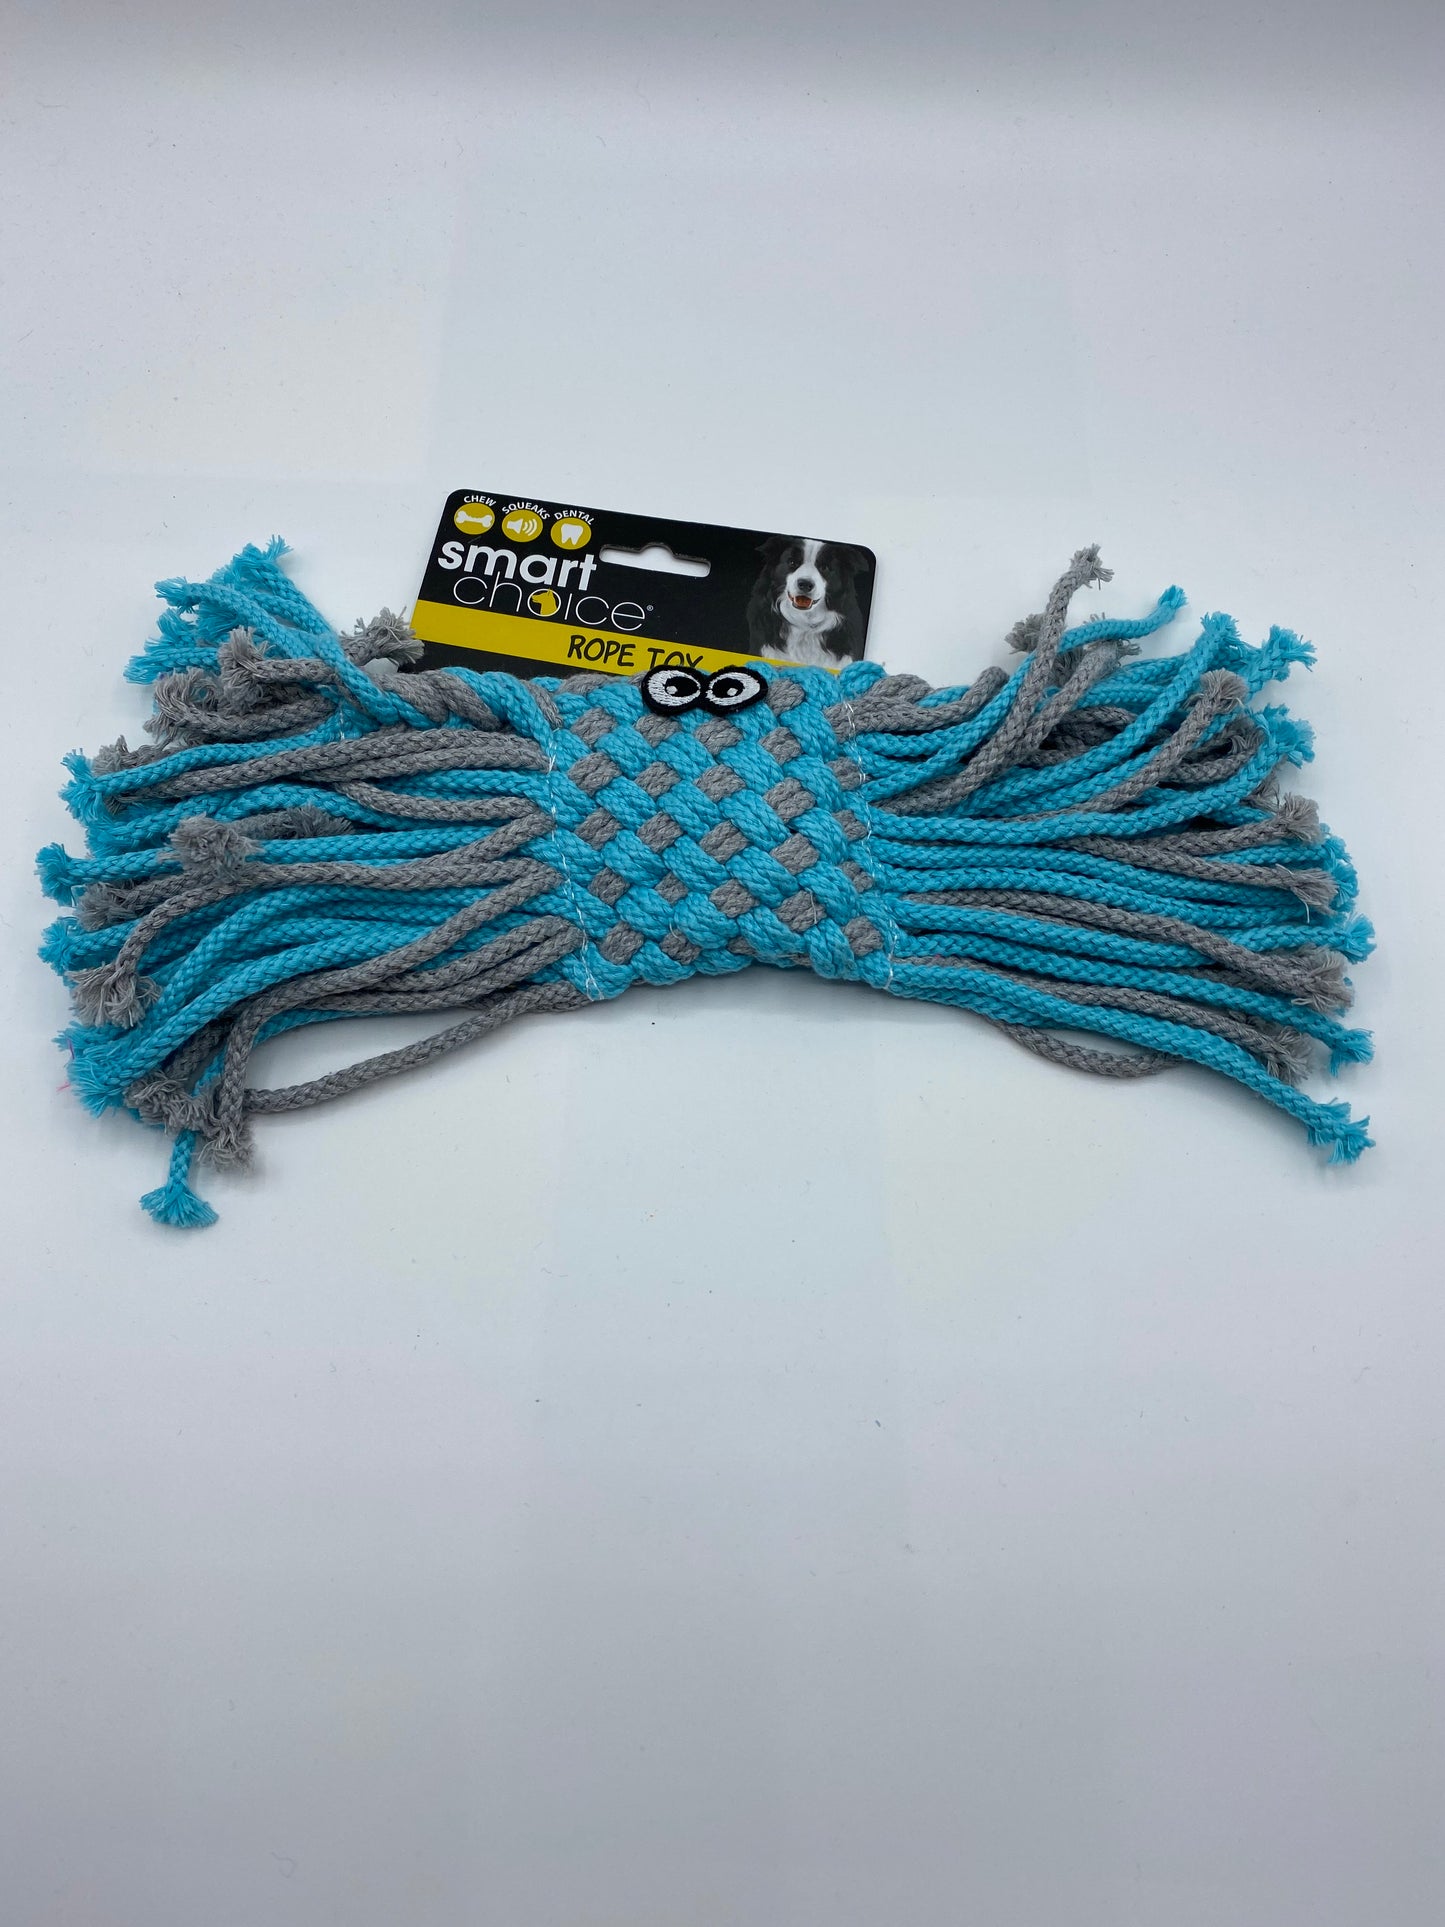 Flat Rope Dog Toy with Eyes, Squeaker and Rope Strands